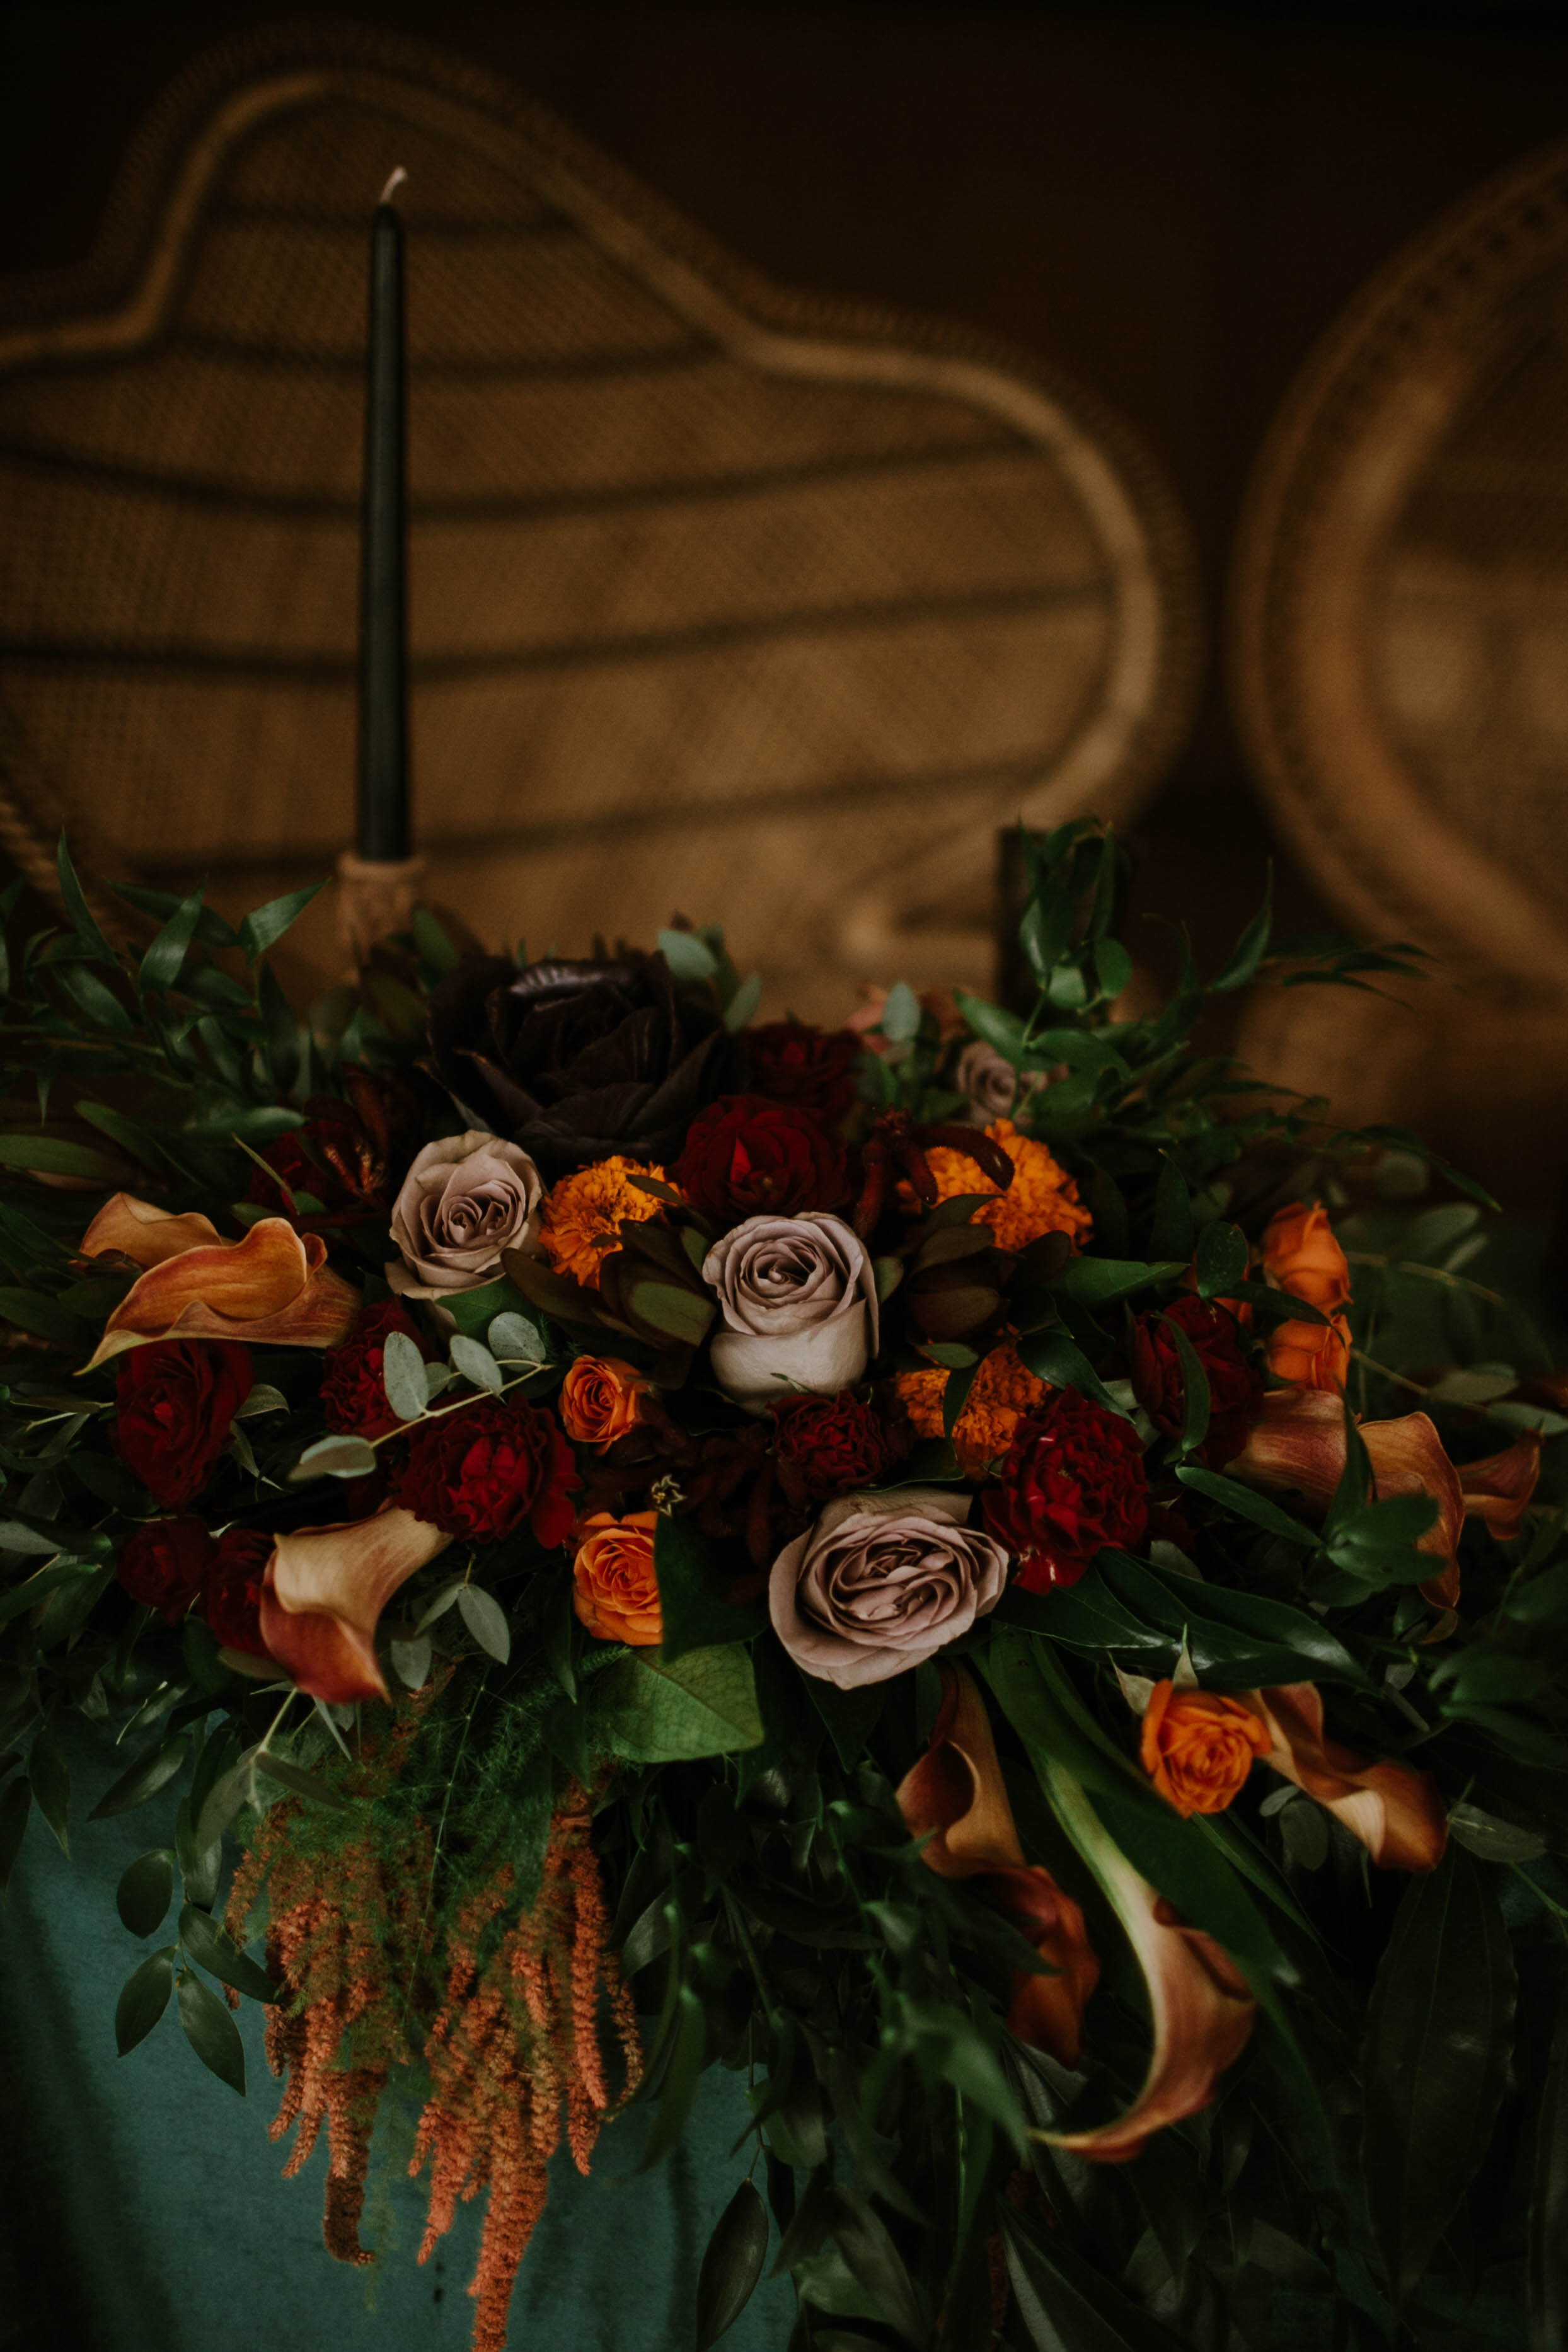 Dark floral centerpieces: Moody Fall Wedding Styled Shoot captured by Gabrielle Daylor Photography. See more fall wedding ideas at CHItheeWED.com!